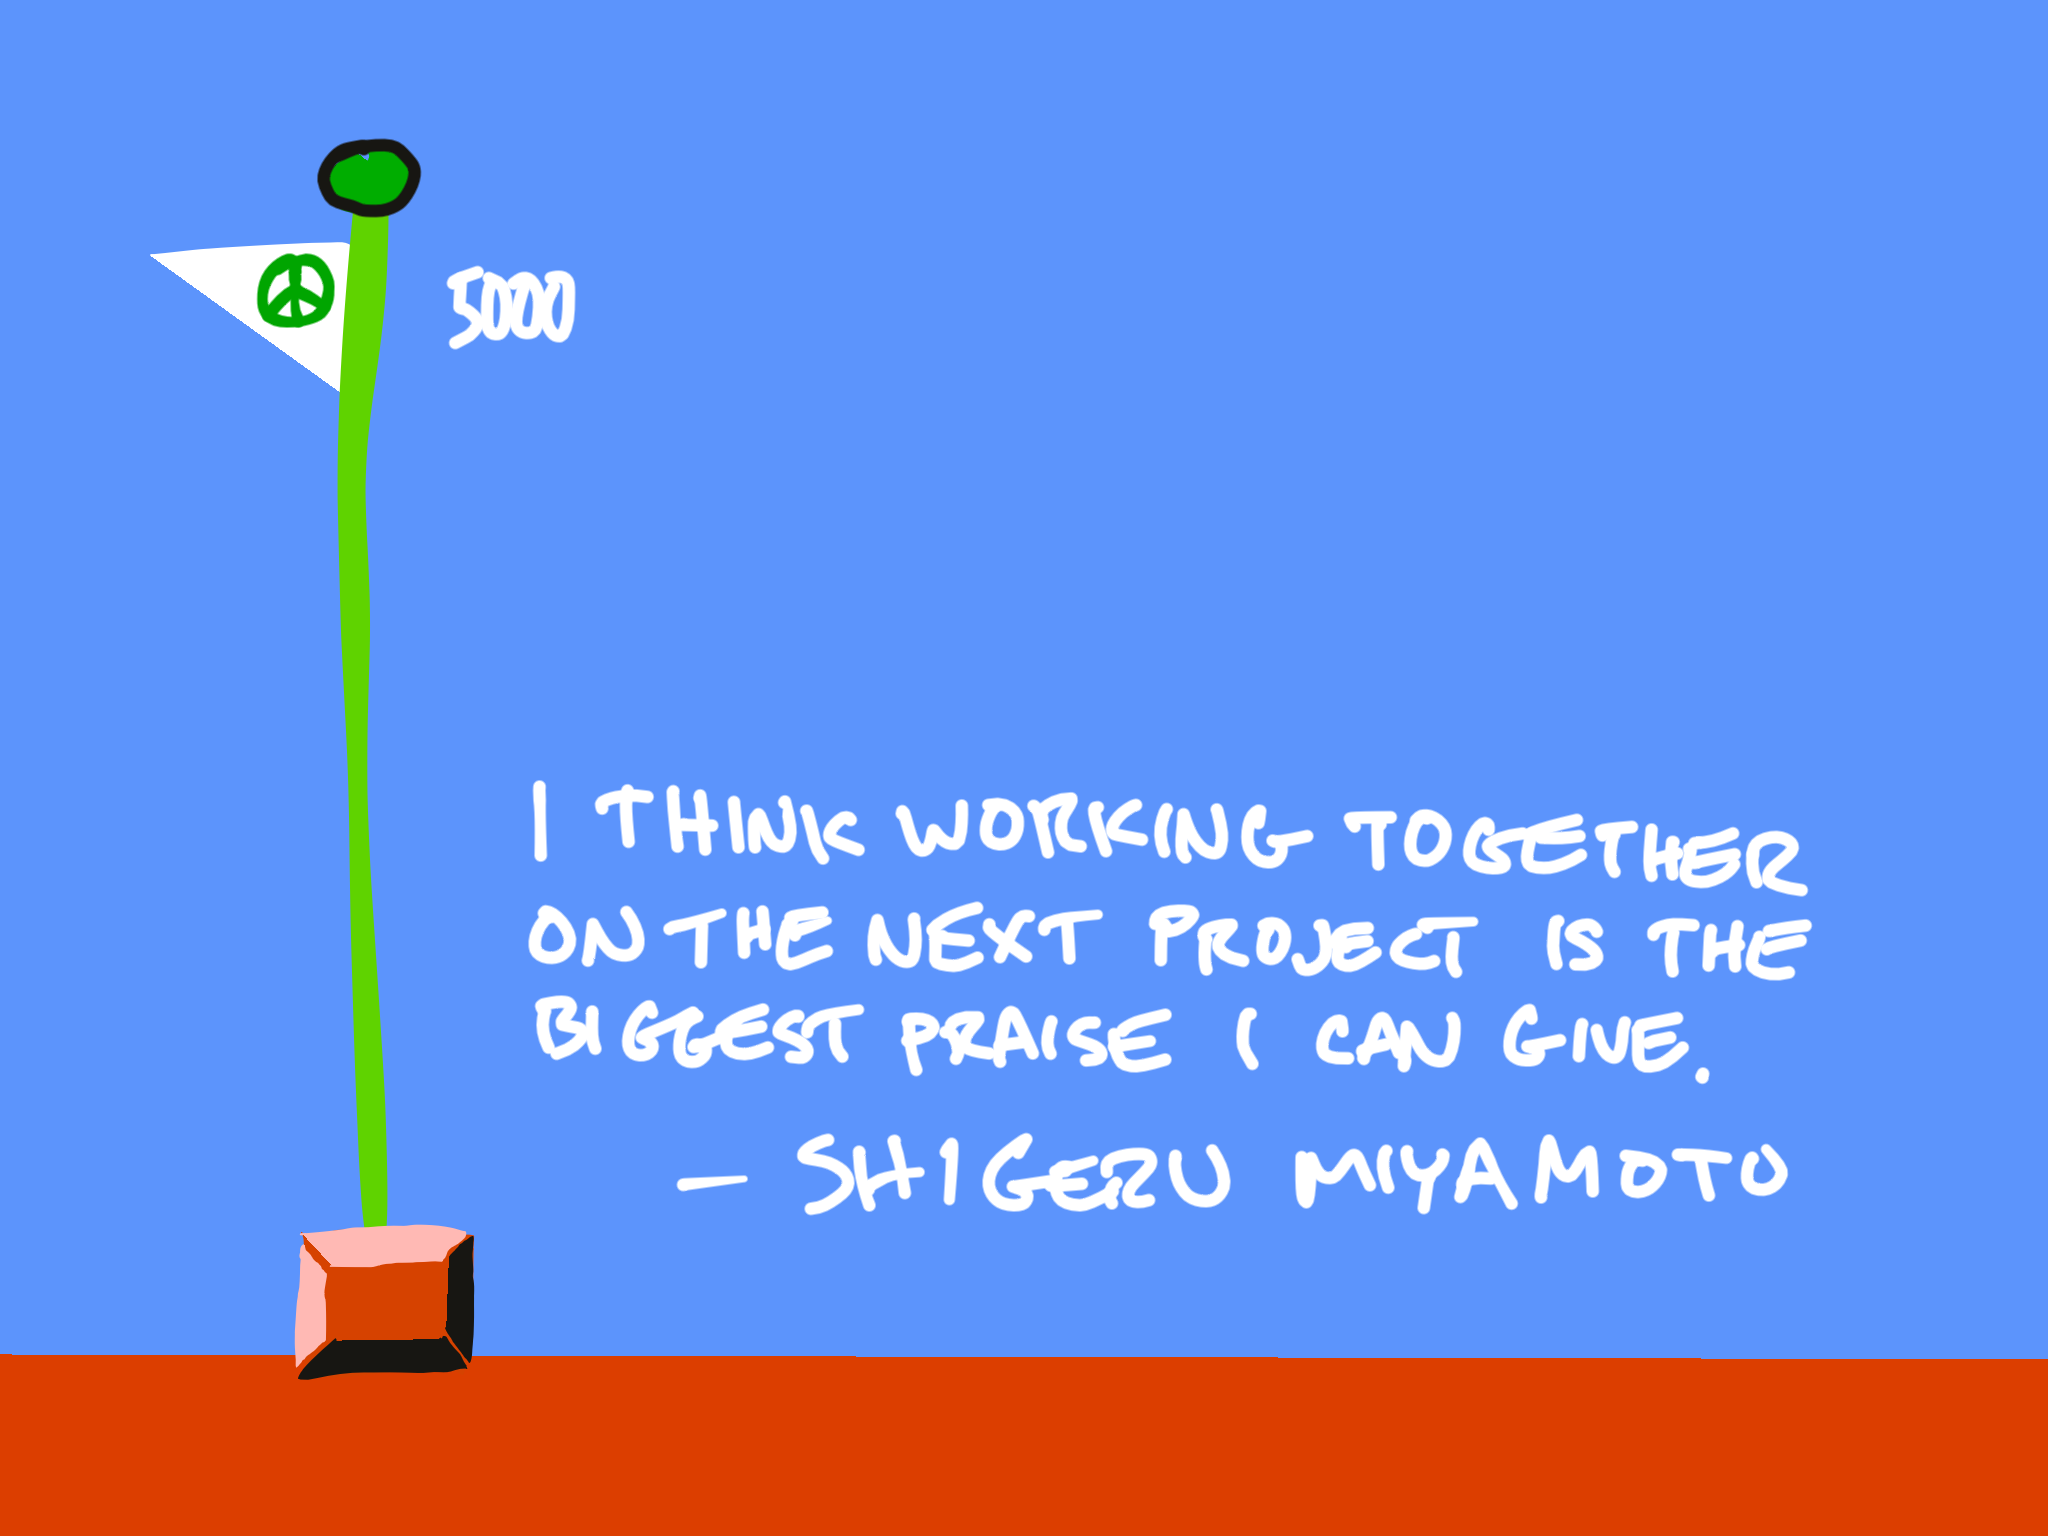 Mario landscape and end level flag with quote from Shigeru Miyamoto: I think working together on the next project is the biggest praise I can give.